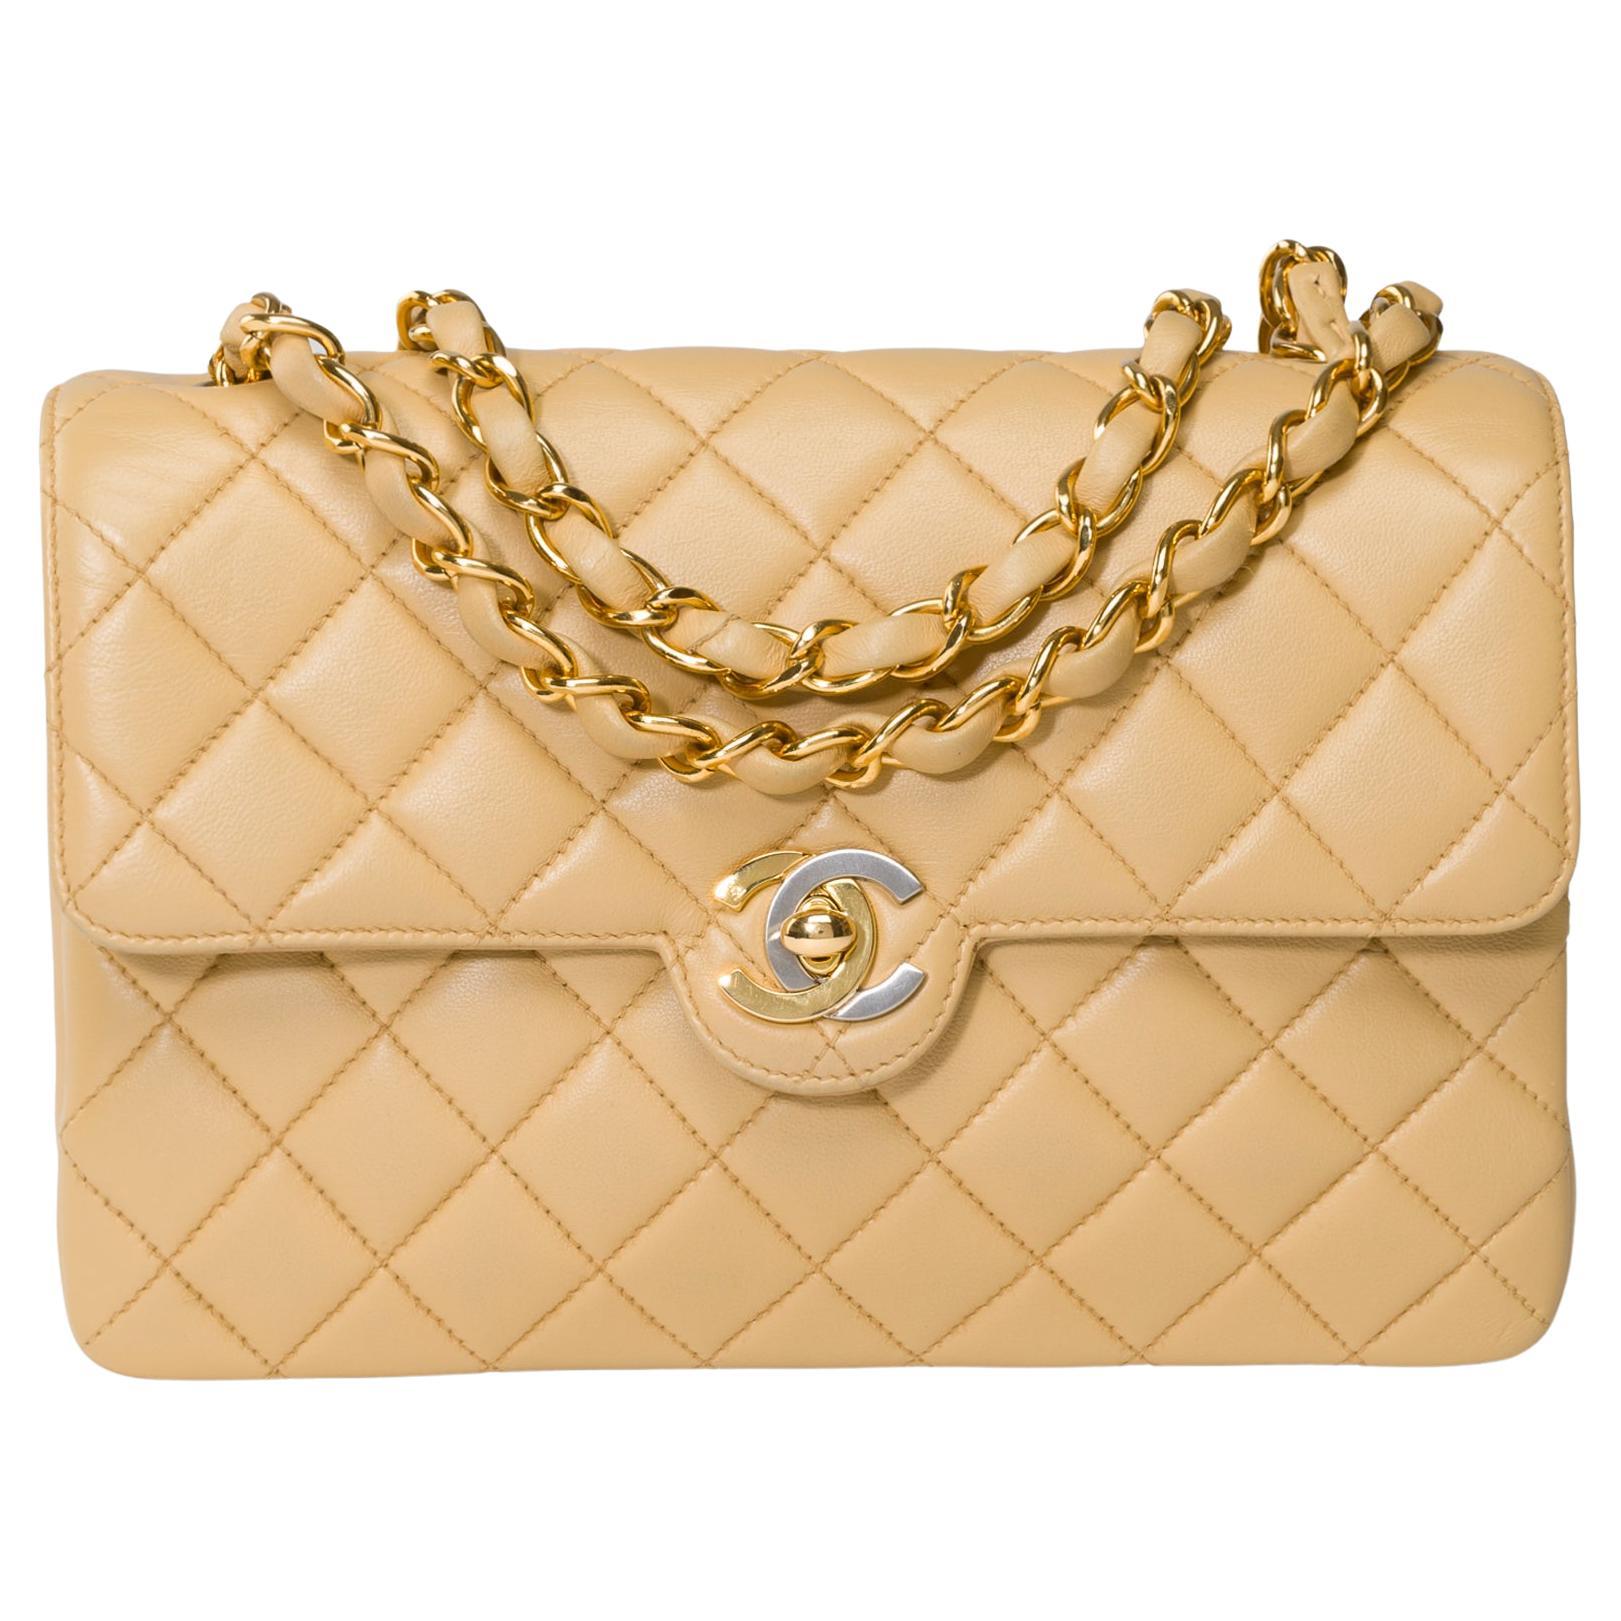 Beautiful Chanel Timeless Mini shoulder Flap bag in beige quilted lambskin, GHW For Sale